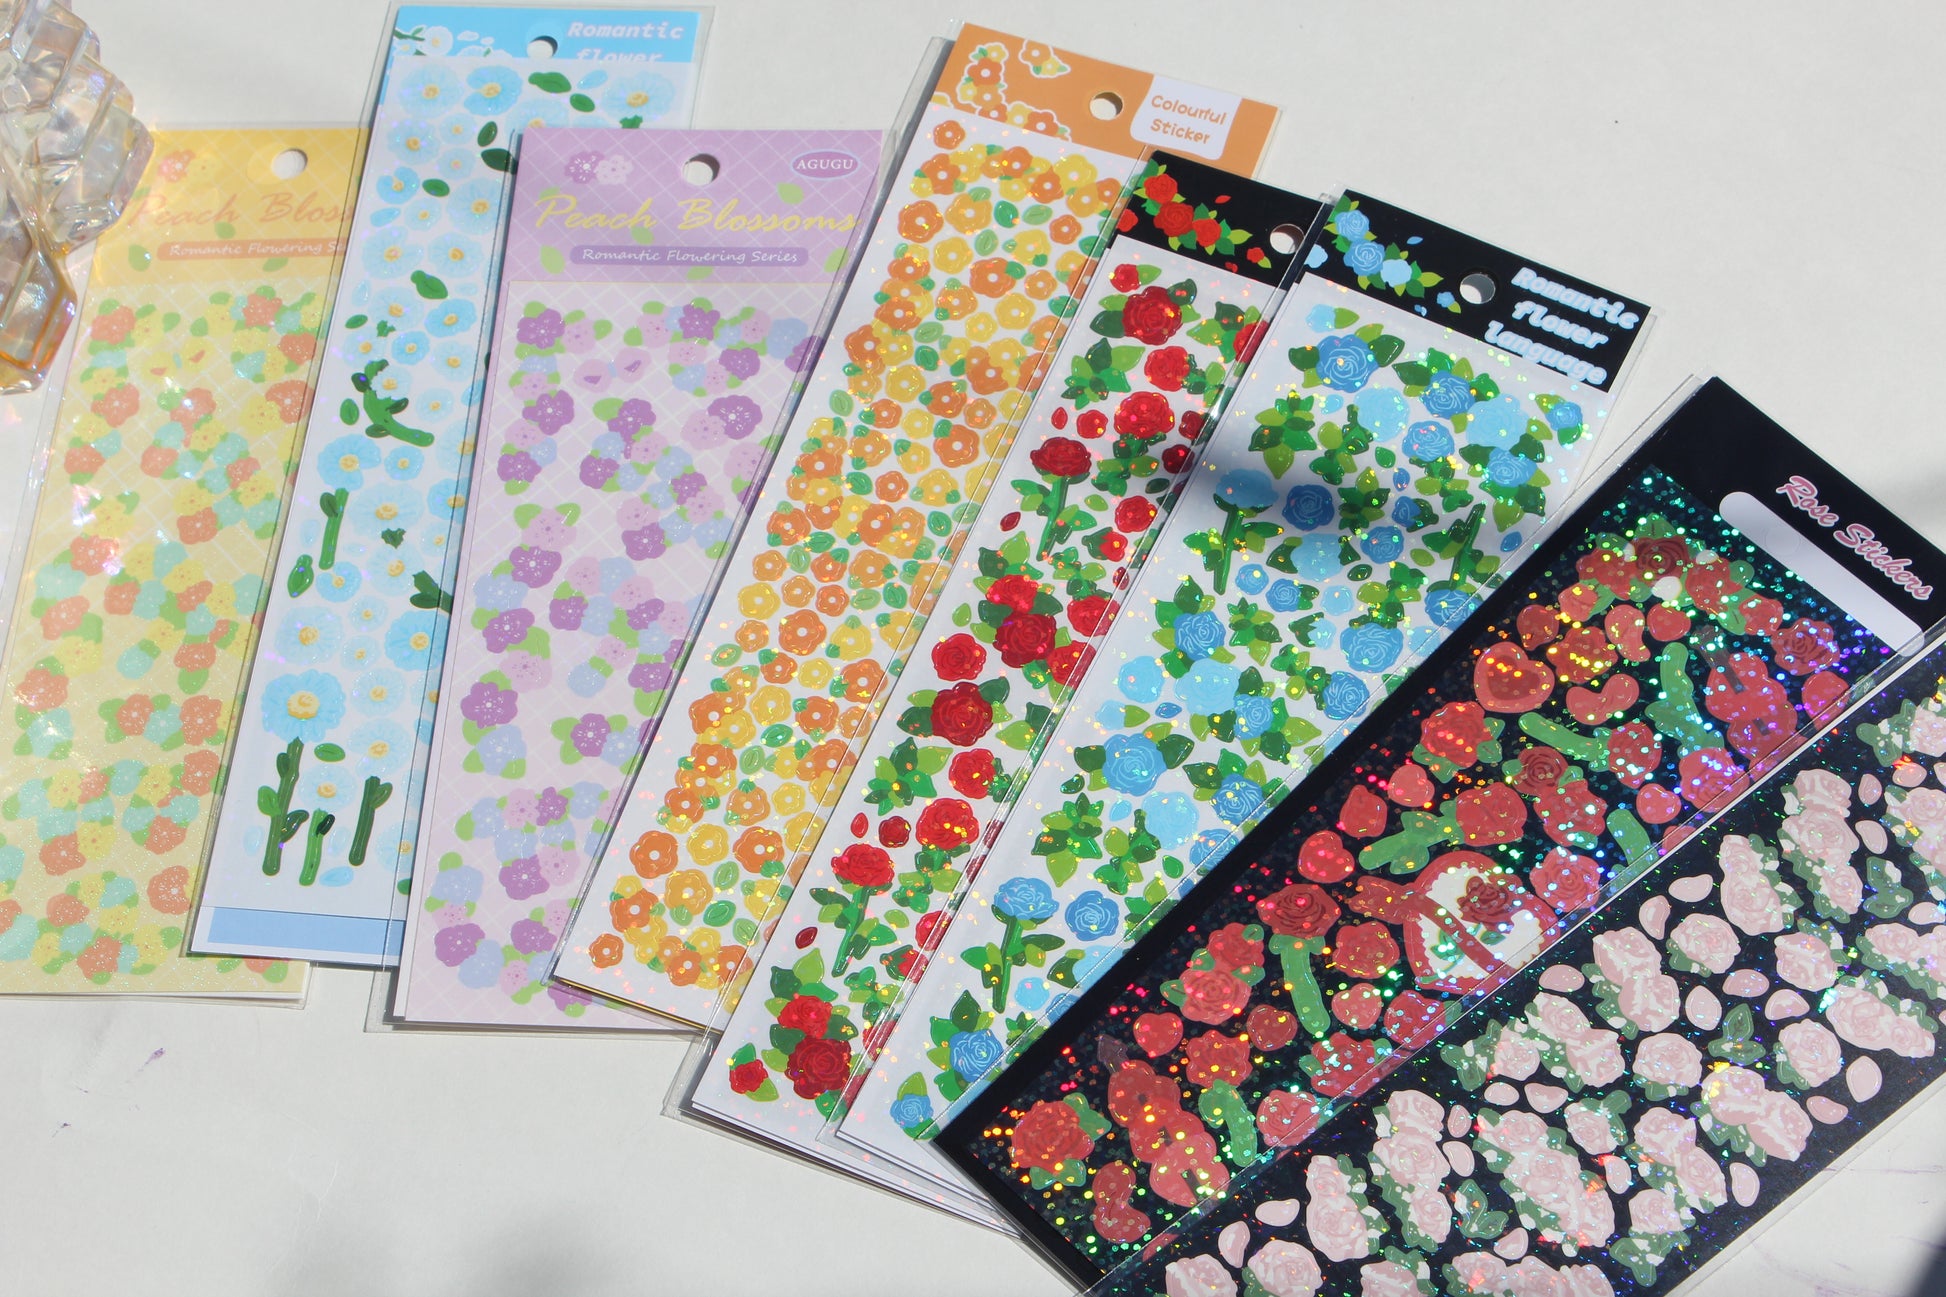 Deco Stickers for Toploaders & Journaling 4 sheets as set [New Sealed]